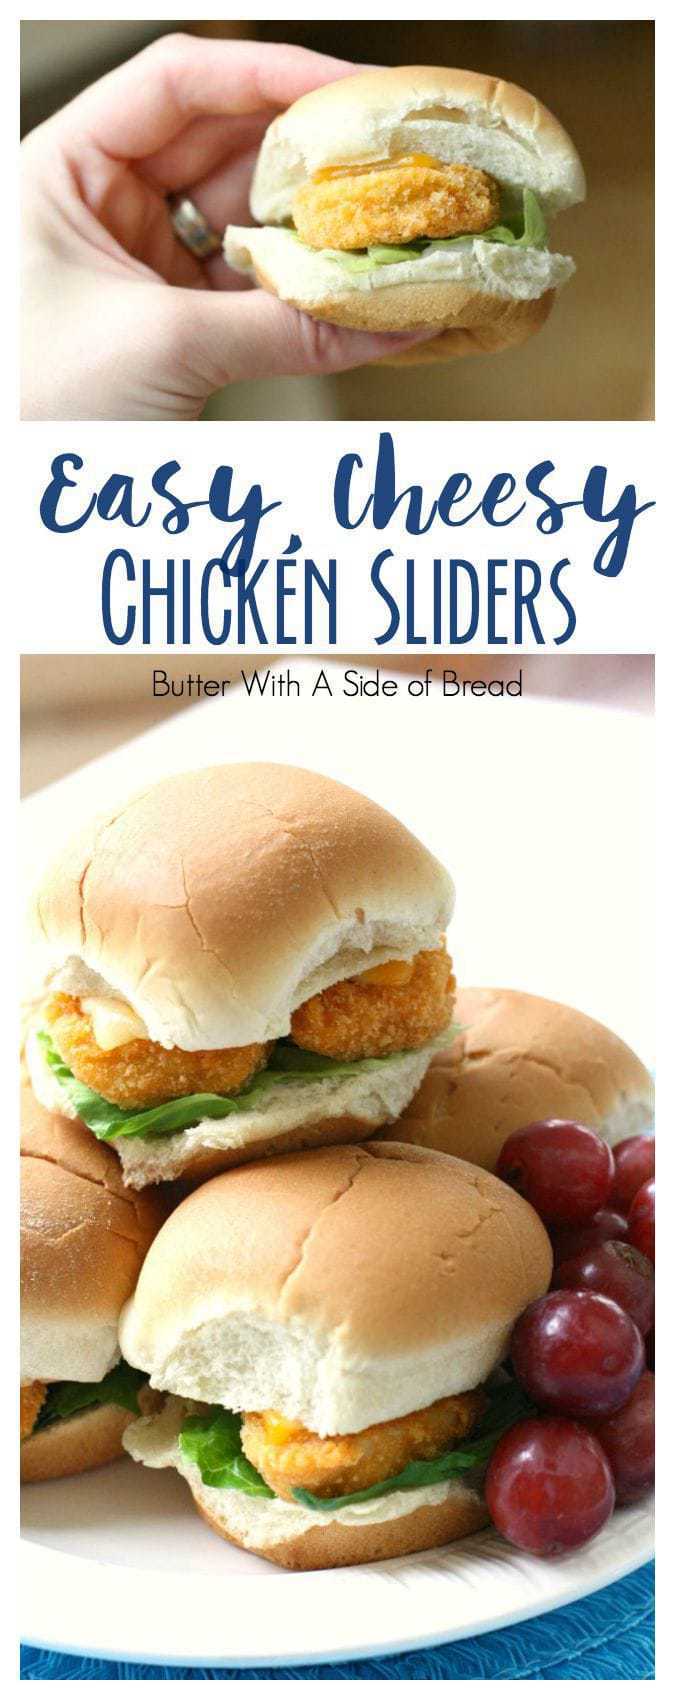 Easy Cheesy Chicken Sliders - Butter With A Side of Bread